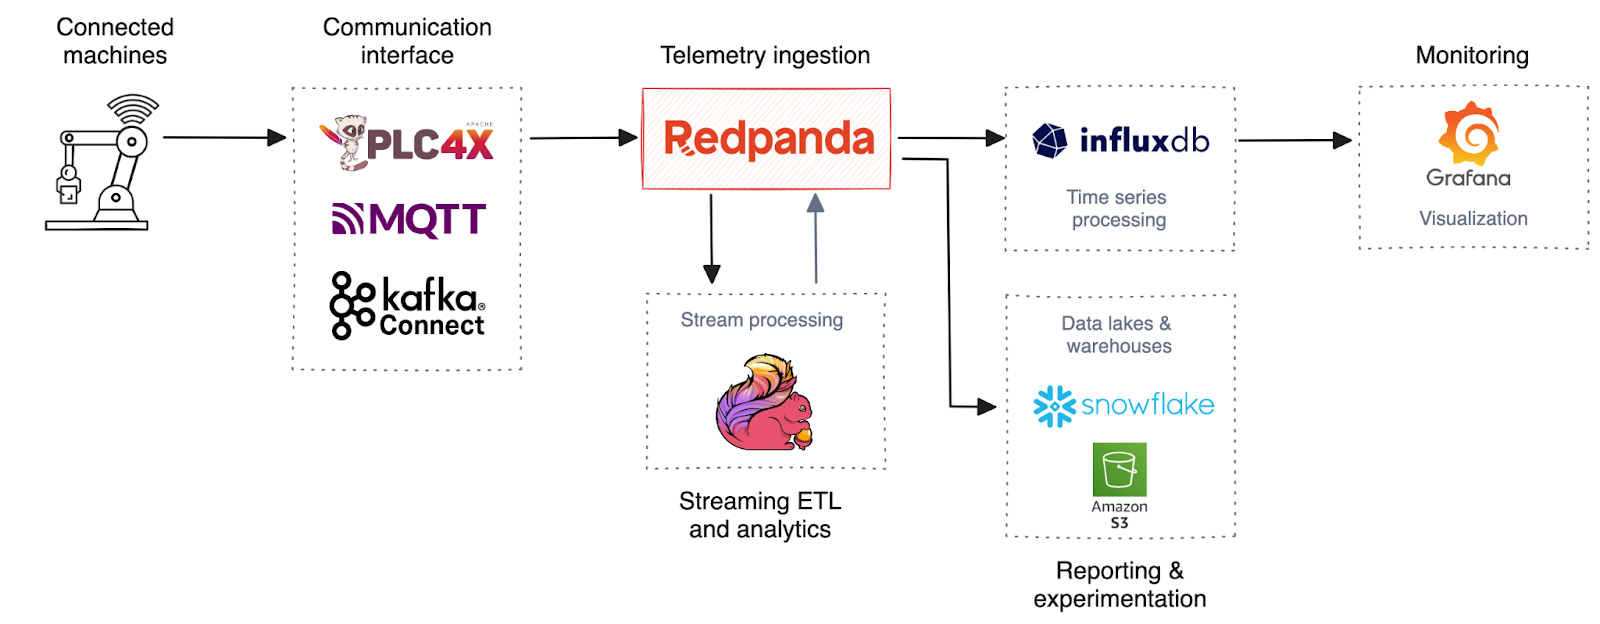 Real-time and offline analytics on telemetry data